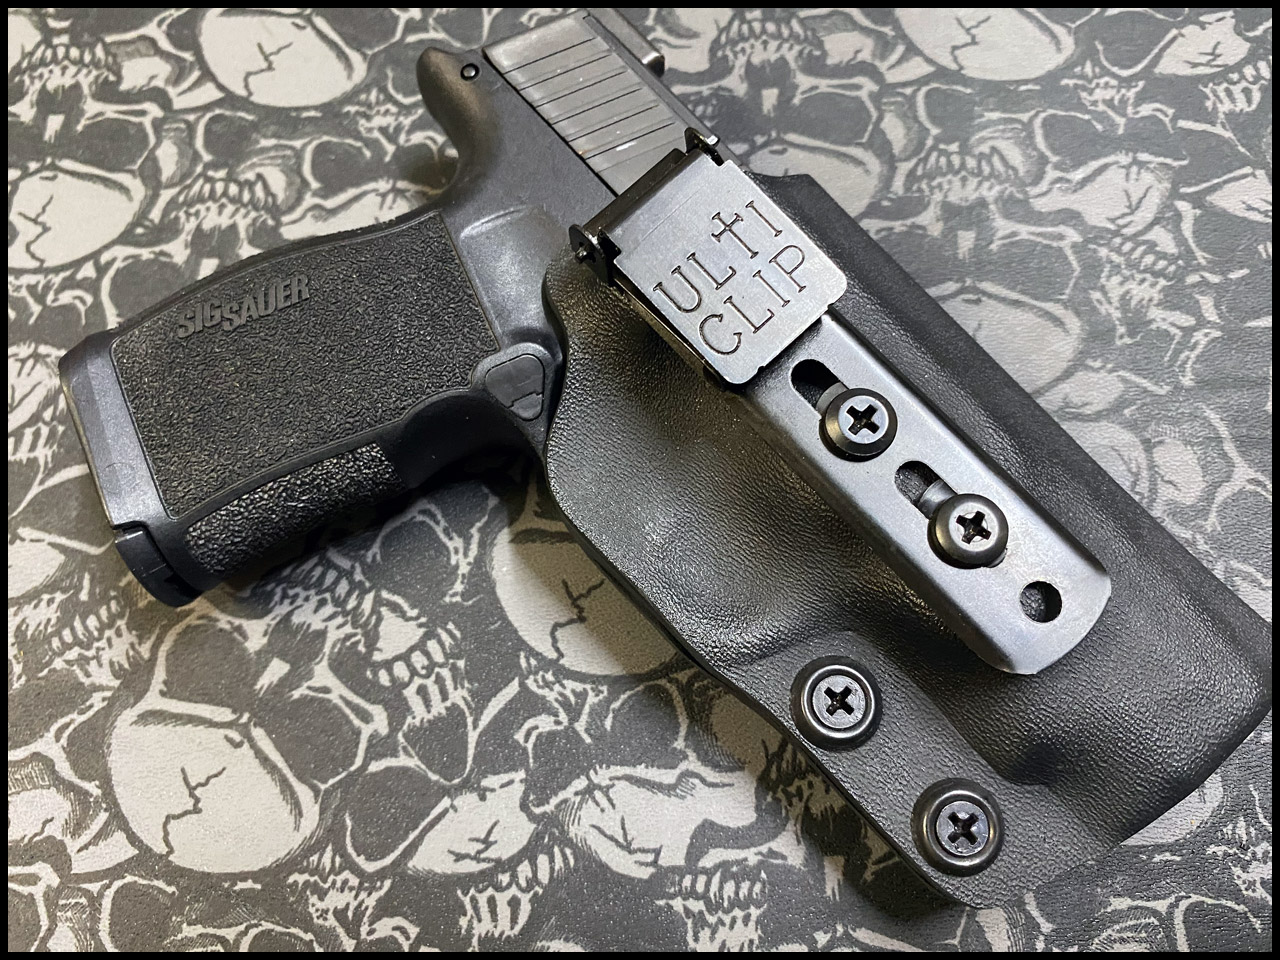 UltiClip Holster - No Belt Required - Athena's Armory